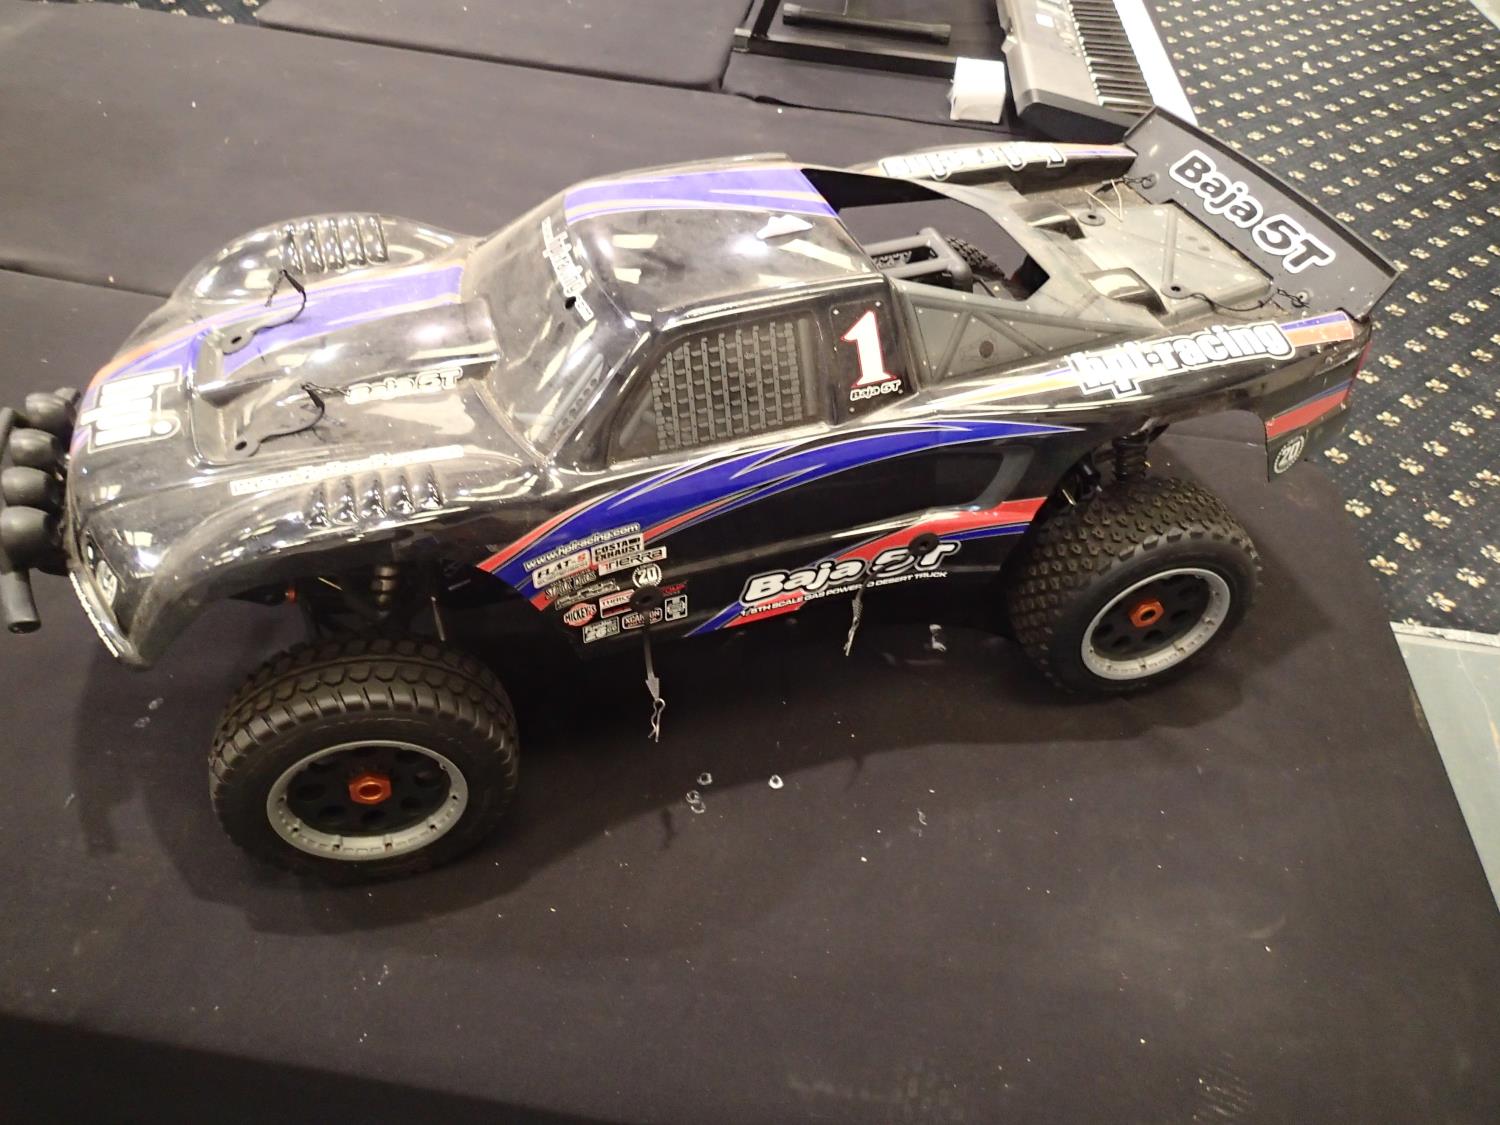 HPI Racing Baja 5T buggy, two stroke 26cc petrol engine with pull start, appears little used/